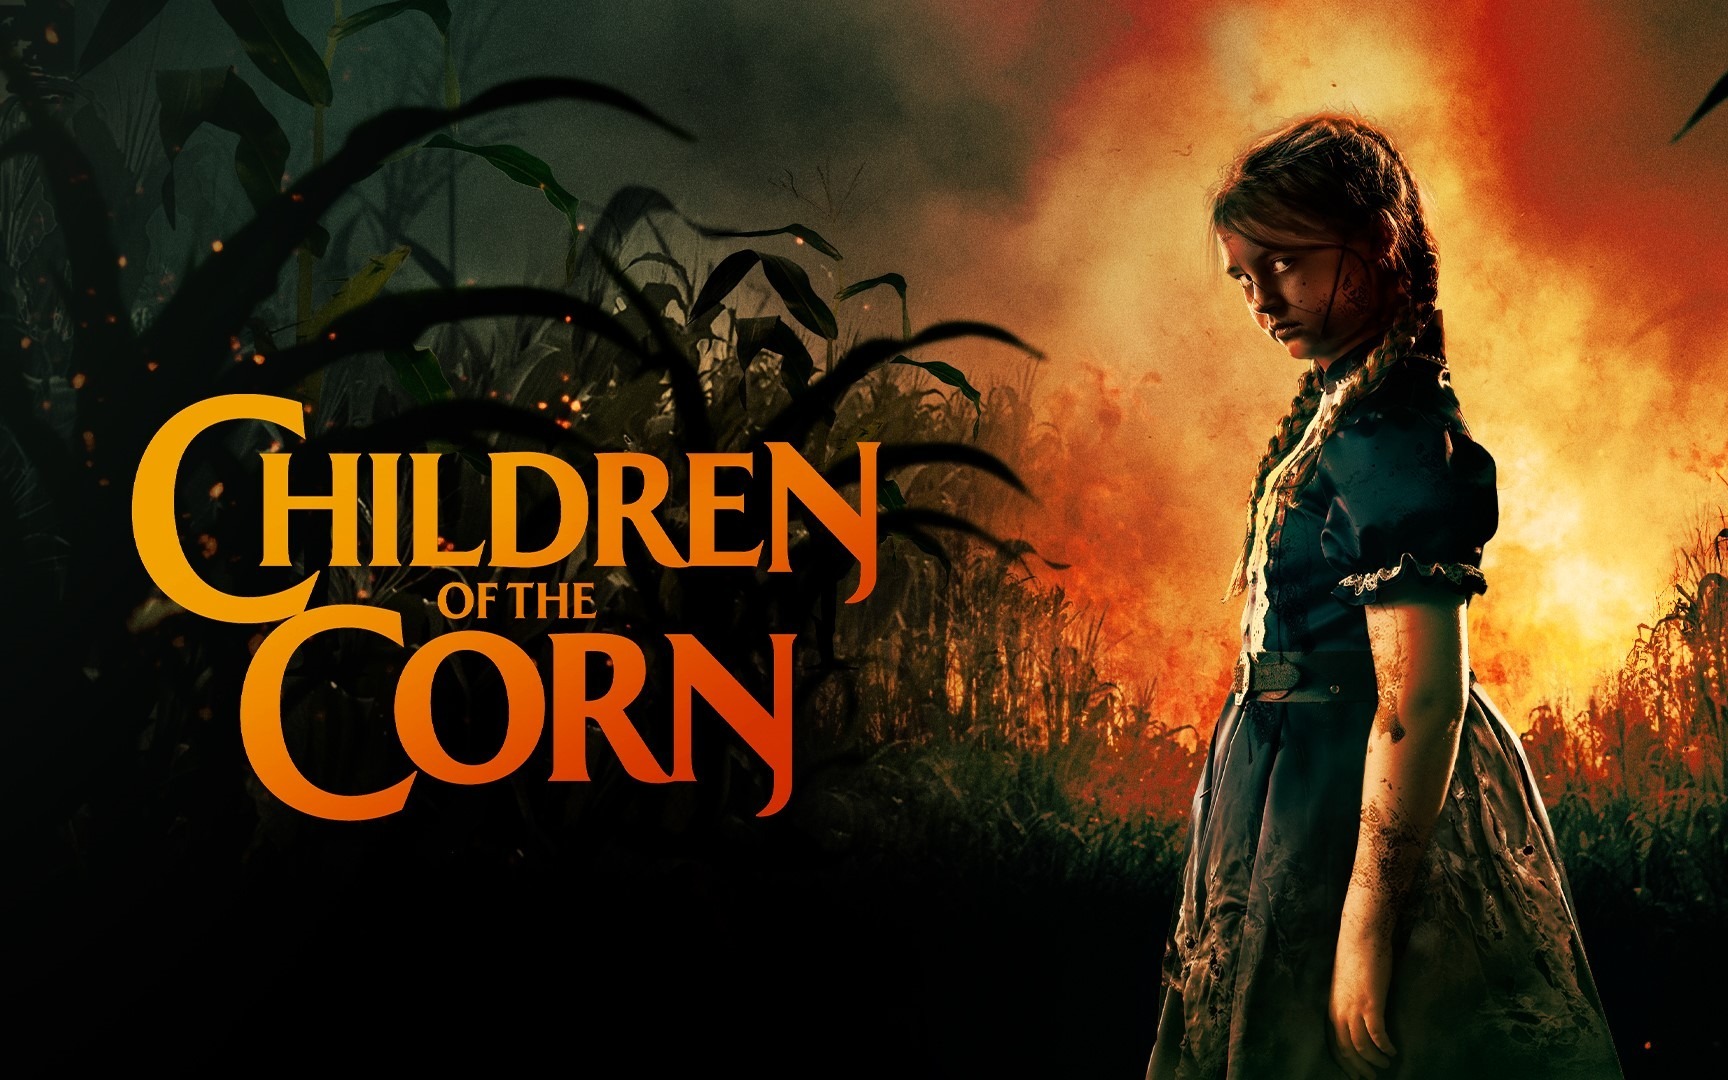 “Children of the Corn” Review